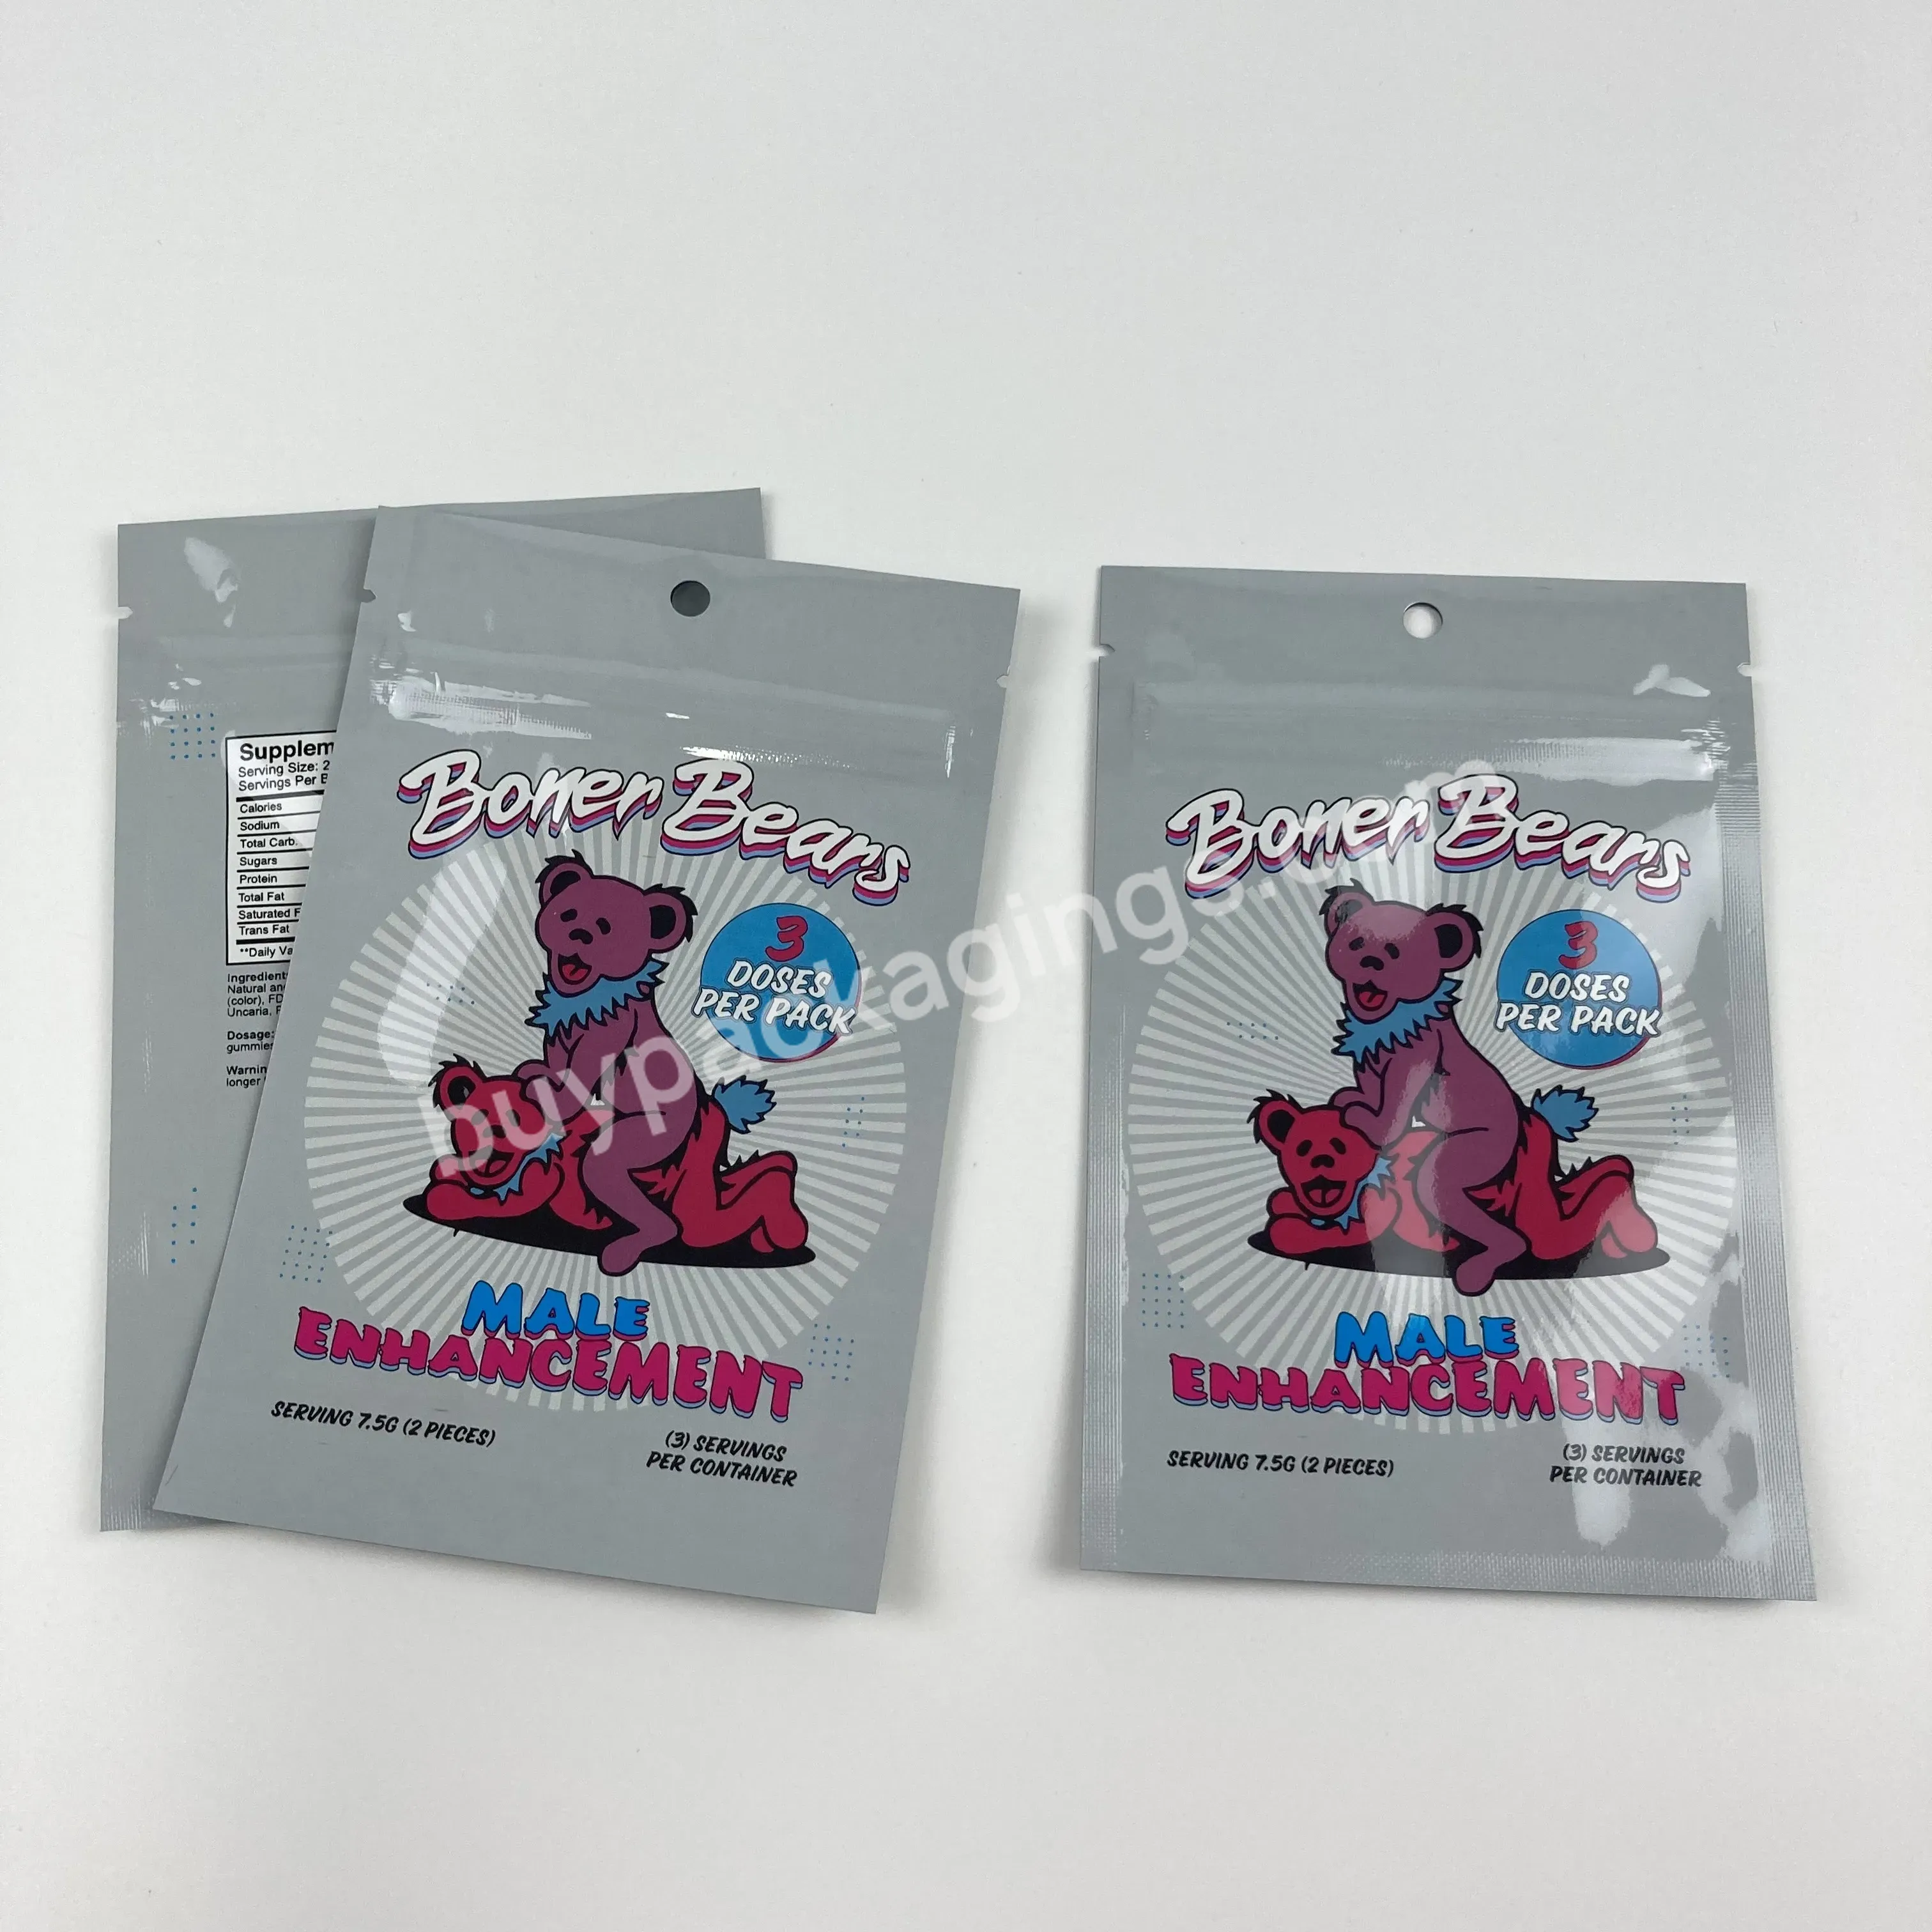 Digital Print Plastic Mylar Flat Pouch With Resealable Zipper And Outer Paper Display Box Bonner Bears Pill Gummies Bag